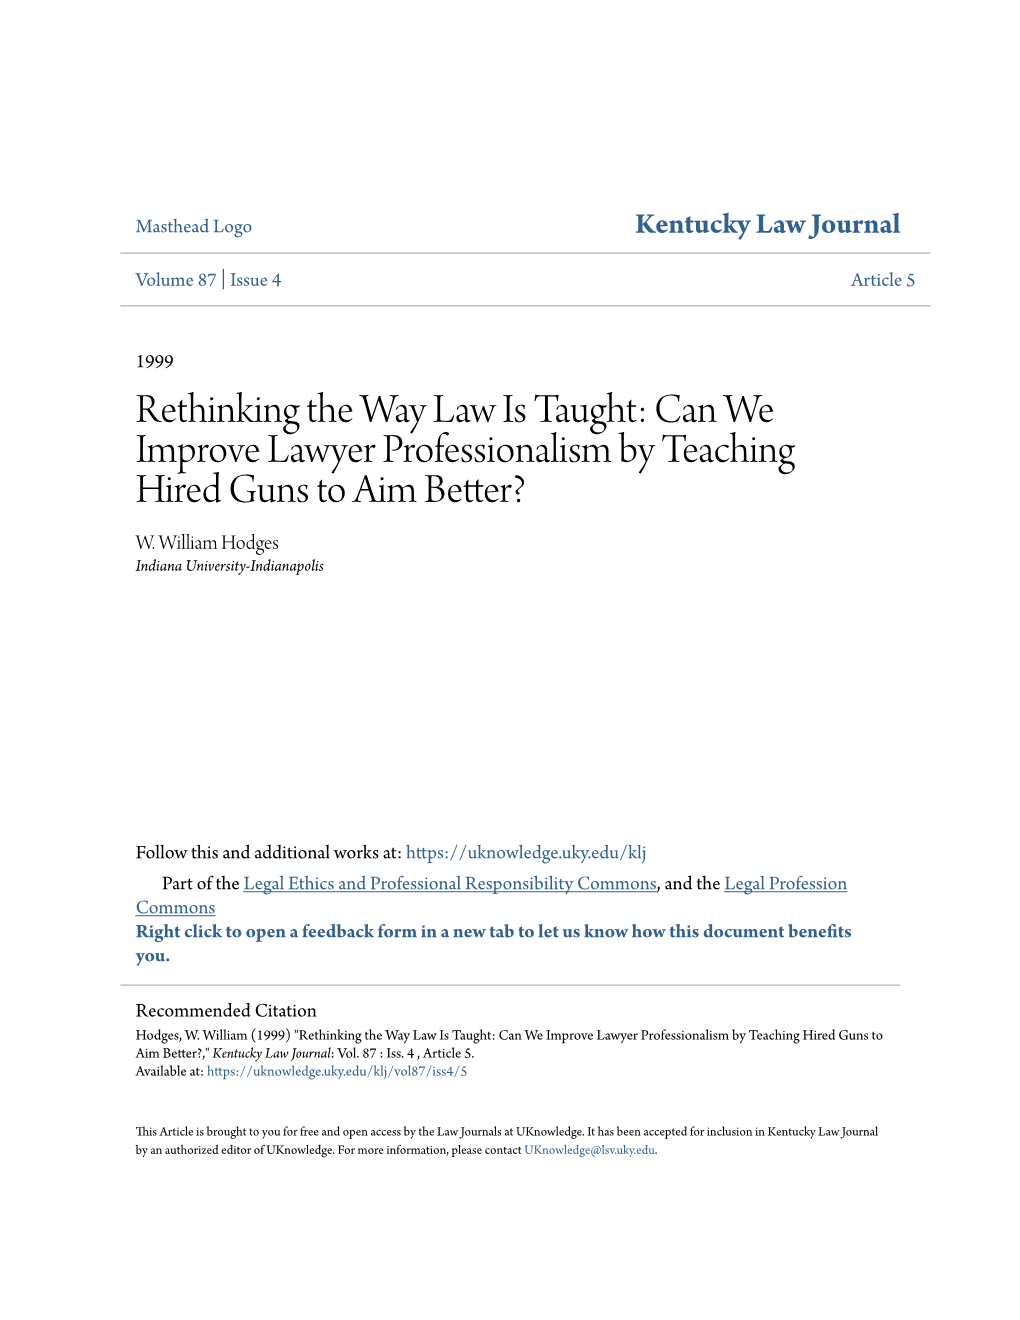 Rethinking the Way Law Is Taught: Can We Improve Lawyer Professionalism by Teaching Hired Guns to Aim Better? W